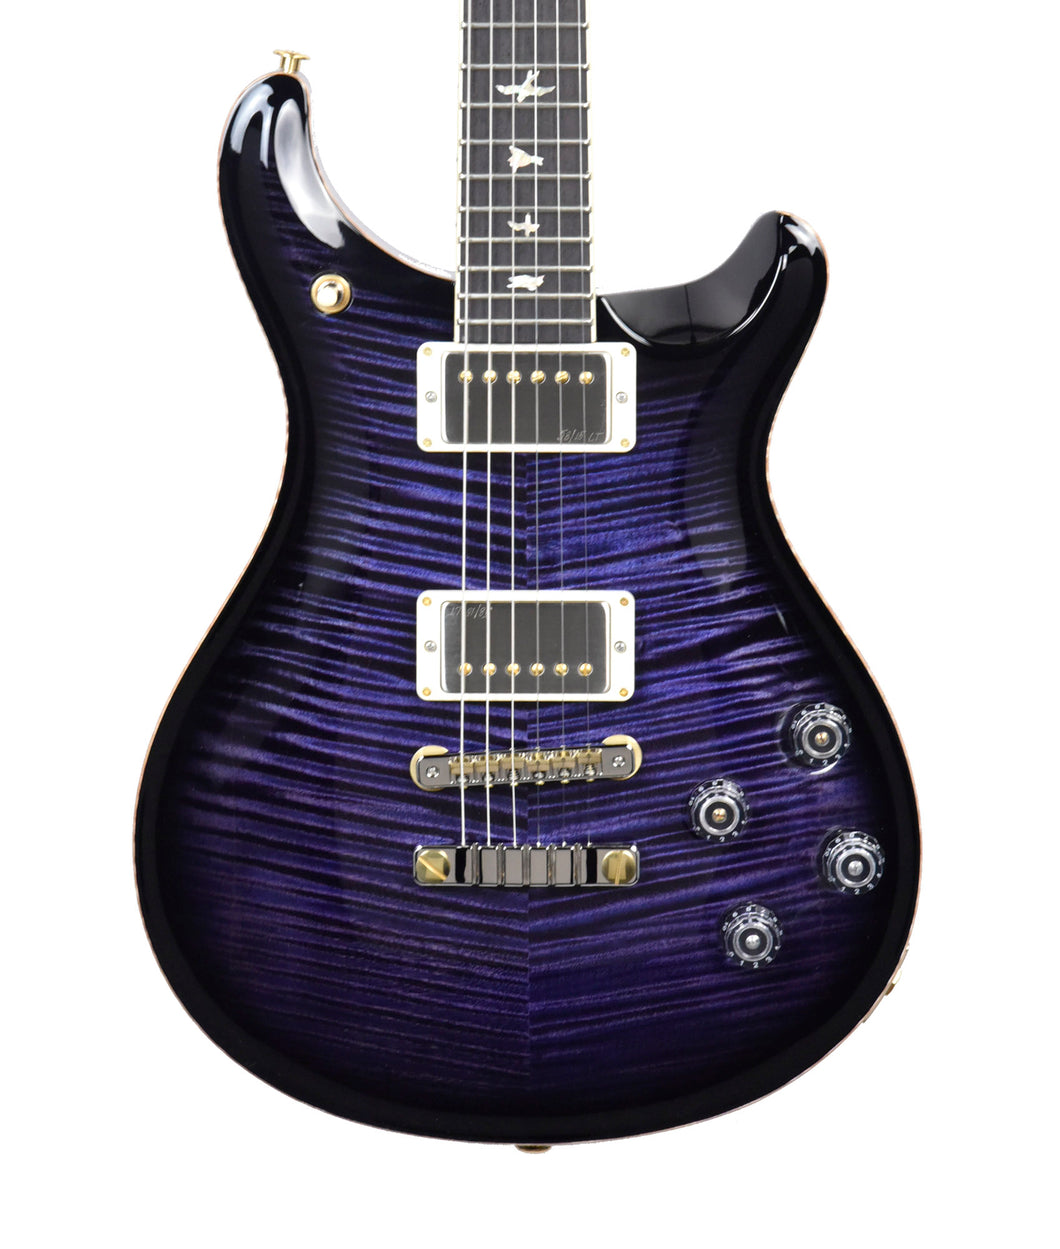 PRS McCarty 594 10 Top Electric Guitar in Purple Mist 230373868 - The Music Gallery